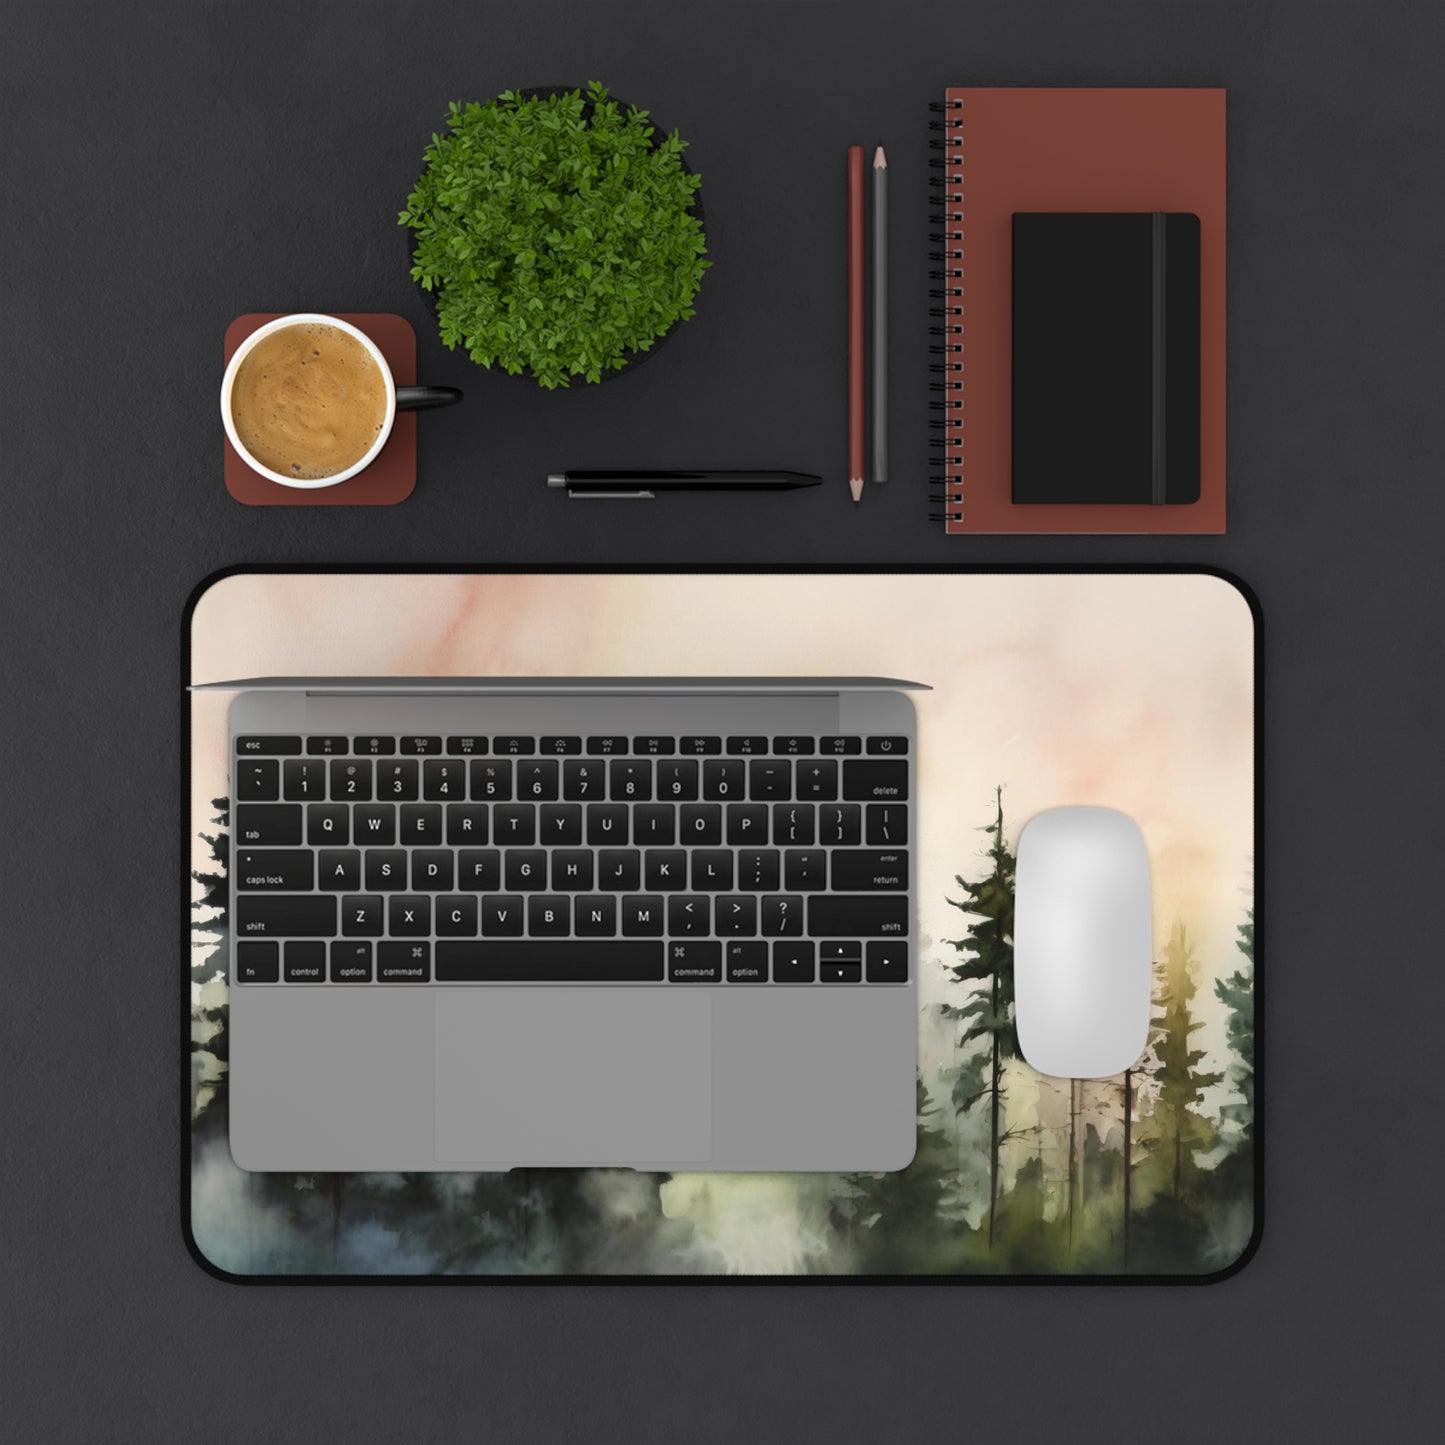 Serene Forest Desk Mat, Enchanted Pine Trees Desk Pad, Extra Large Mouse Pad, Nature Keyboard Mat, Gaming Mousepad, Calming Desk Decor